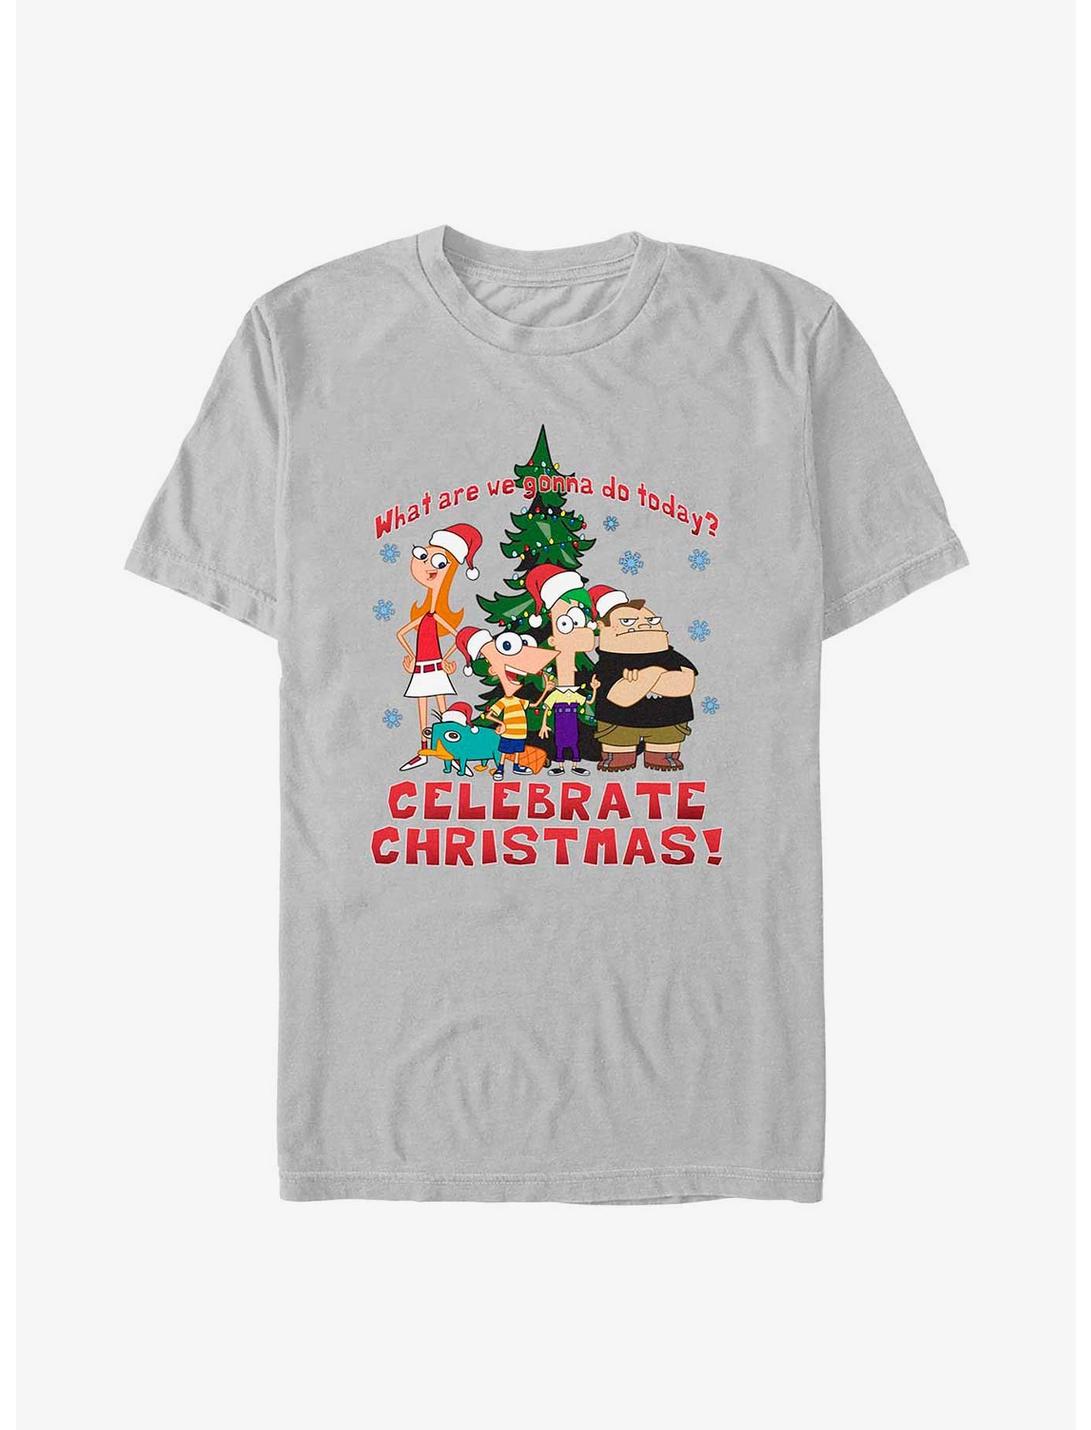 Disney Phineas And Ferb Celebrate Christmas T-Shirt, SILVER, hi-res